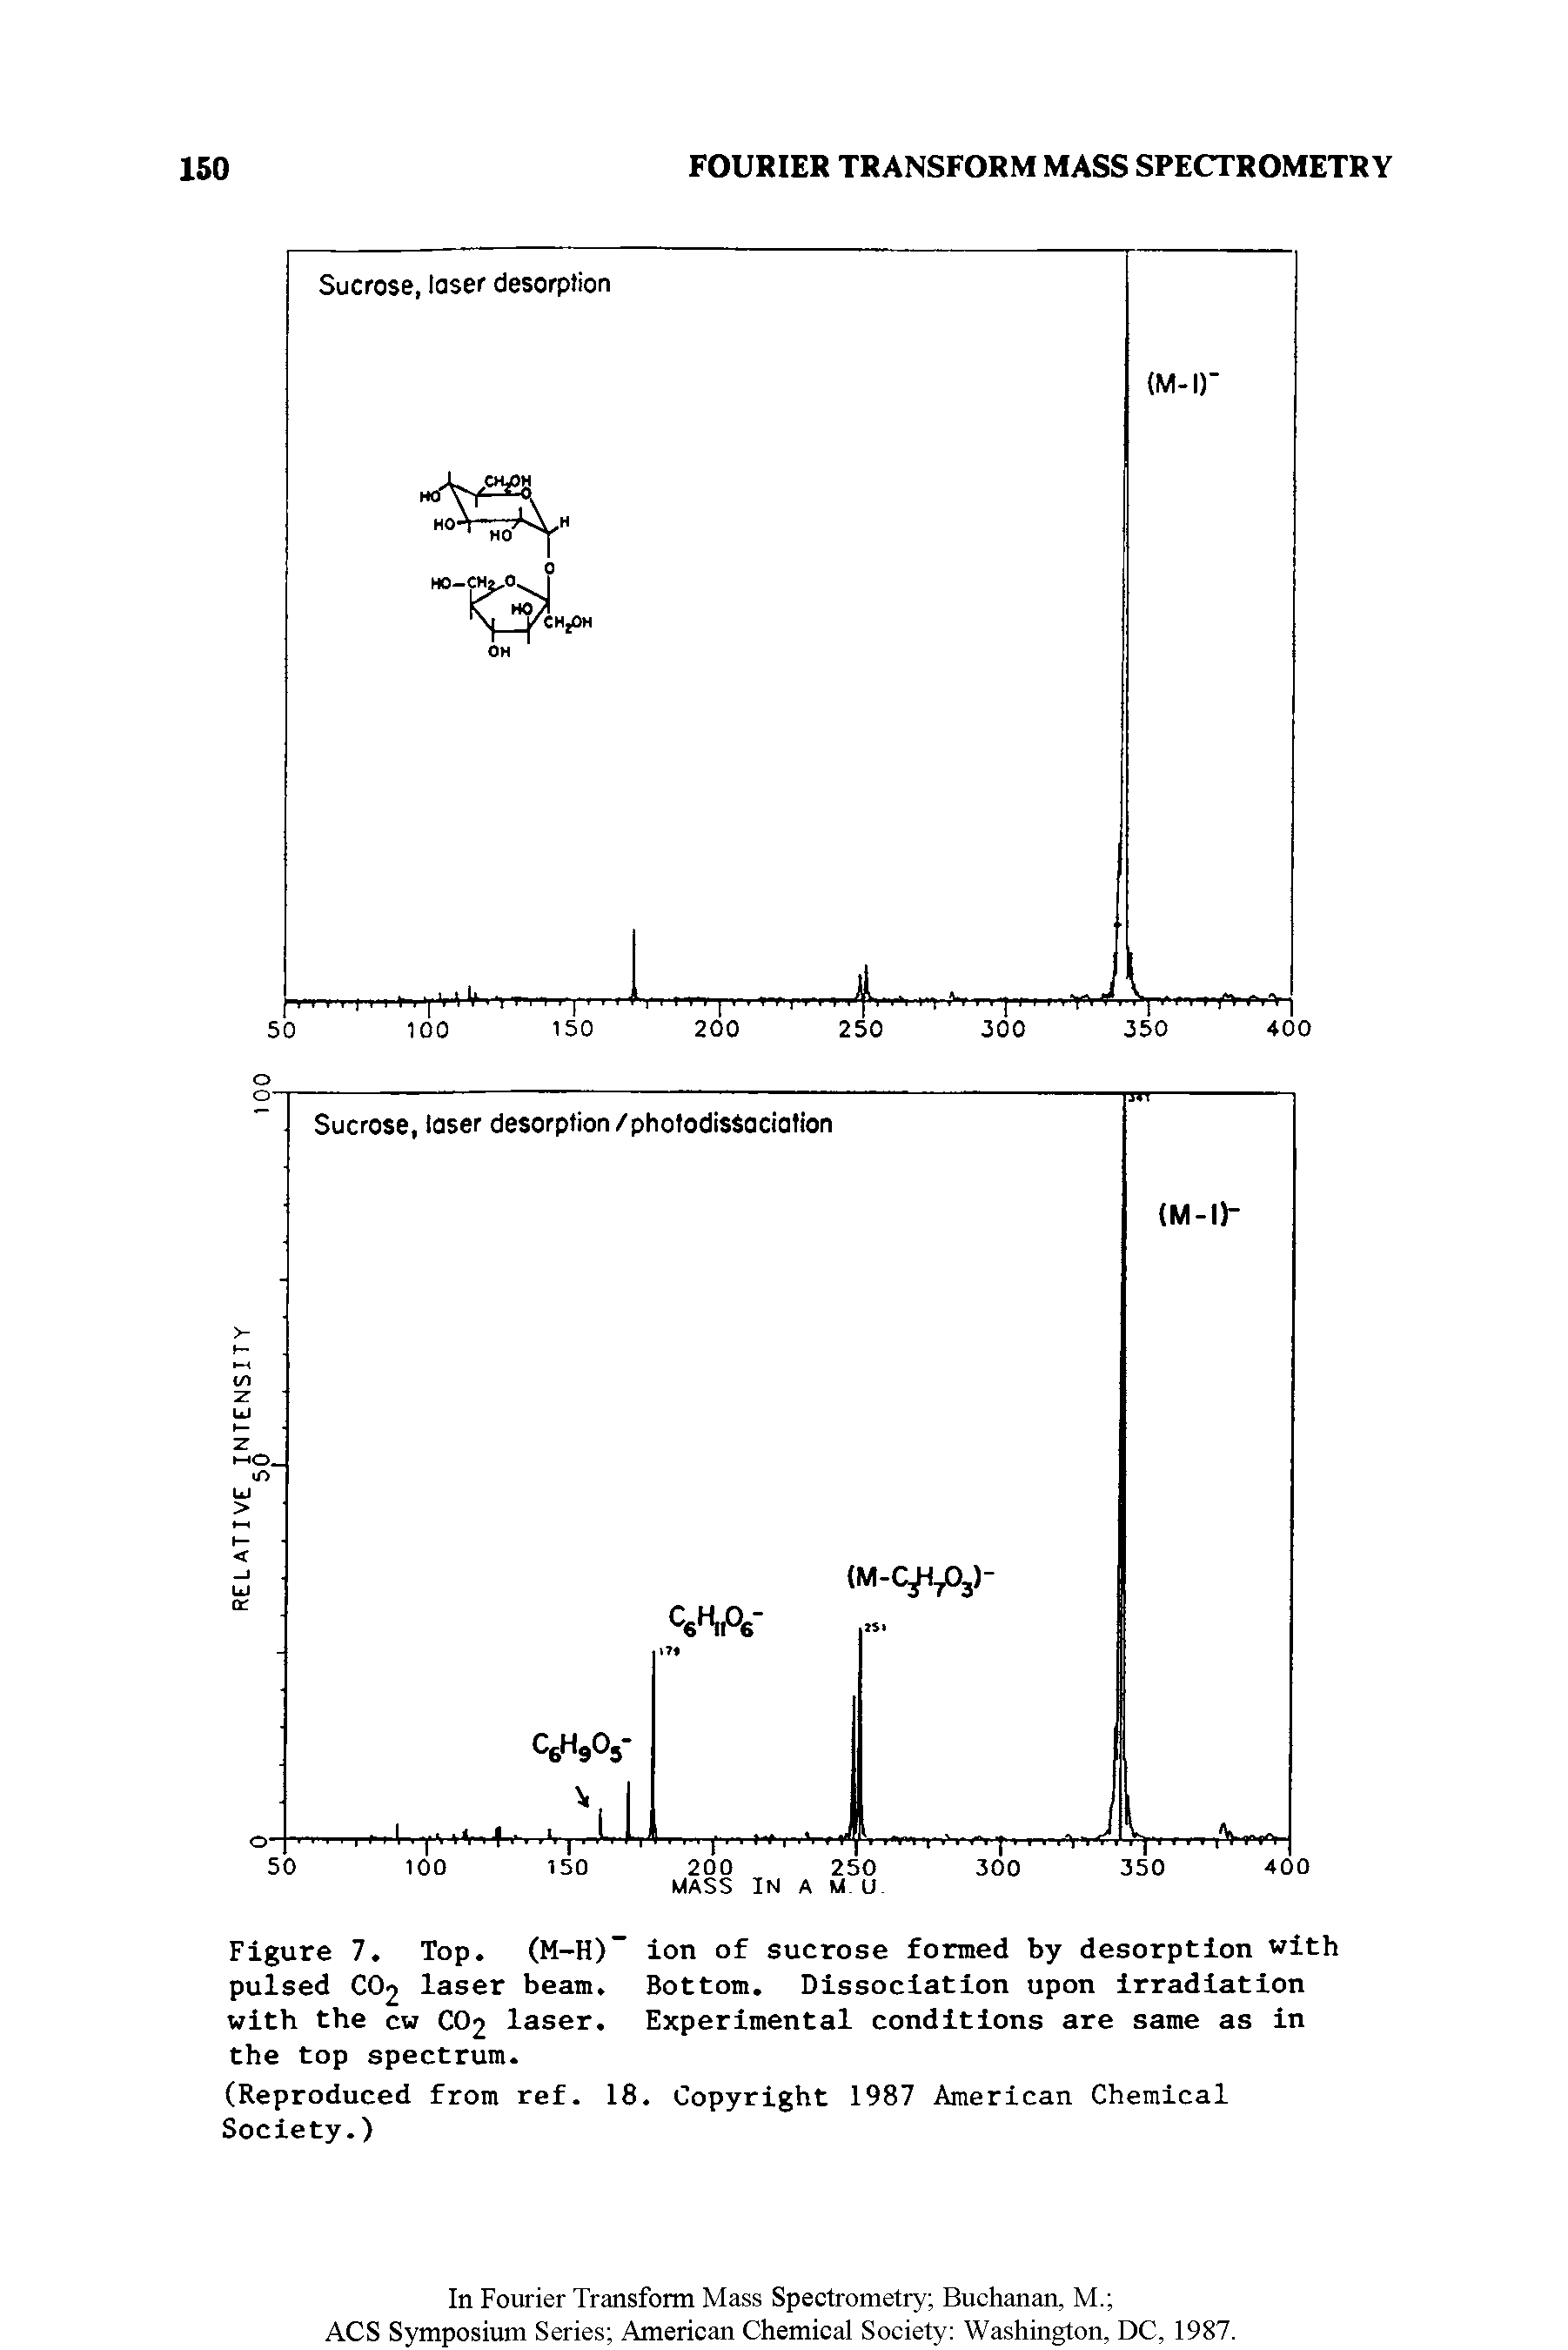 Figure 7. Top. (M-H)- ion of sucrose formed by desorption with pulsed CO2 laser beam. Bottom. Dissociation upon irradiation with the cw CO2 laser. Experimental conditions are same as in the top spectrum.